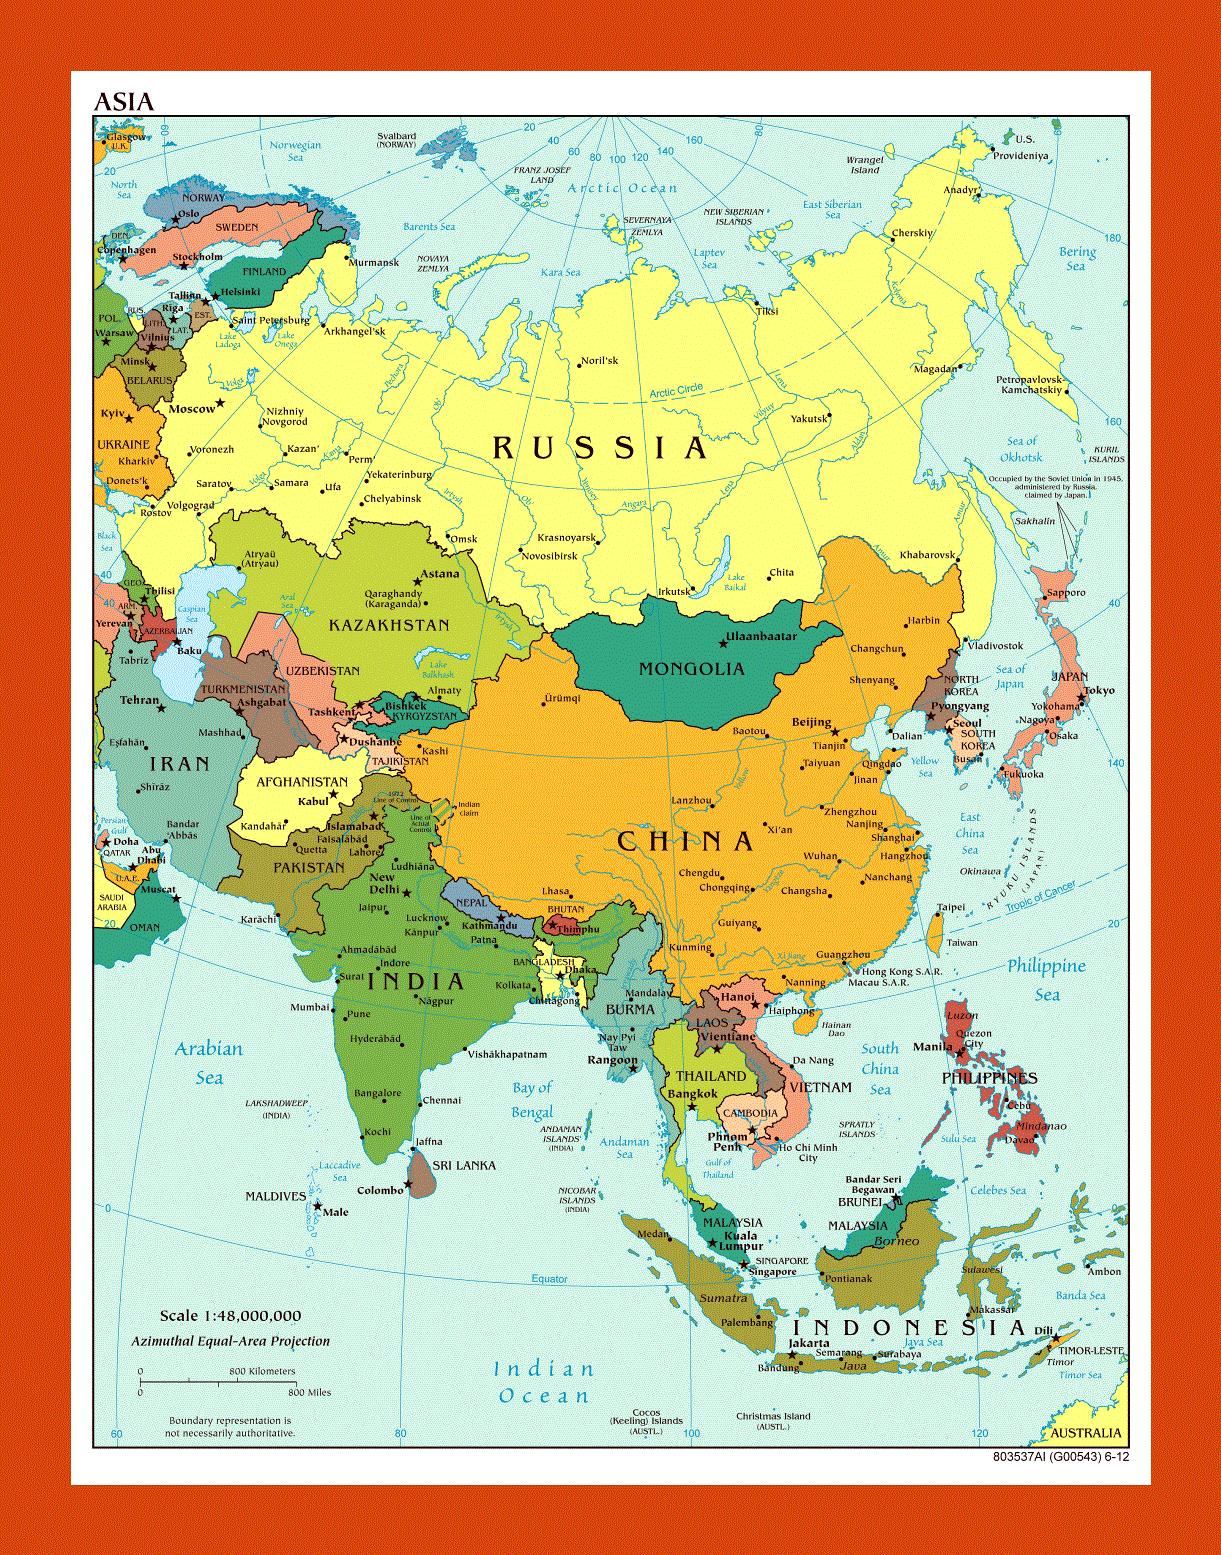 Political map of Asia - 2012